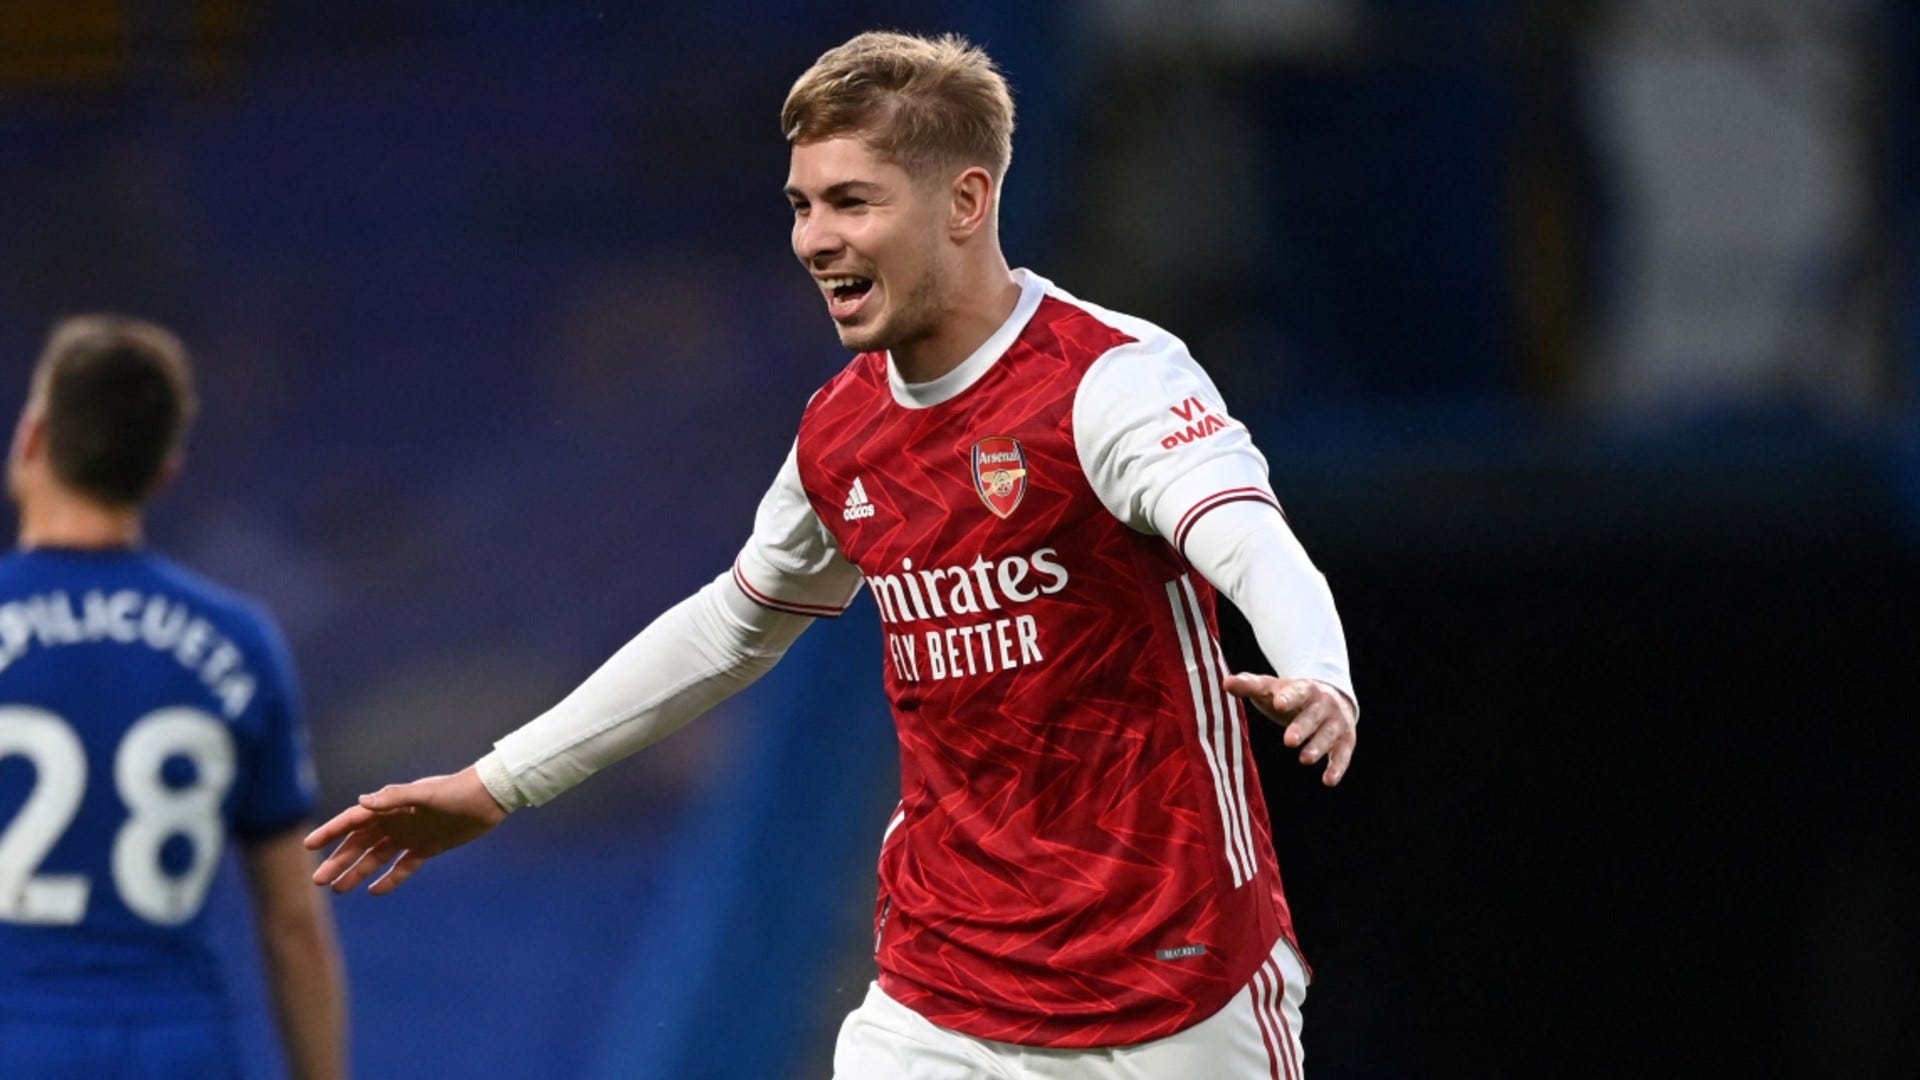 Smith Rowe signs new five-year Arsenal contract and gets No 10